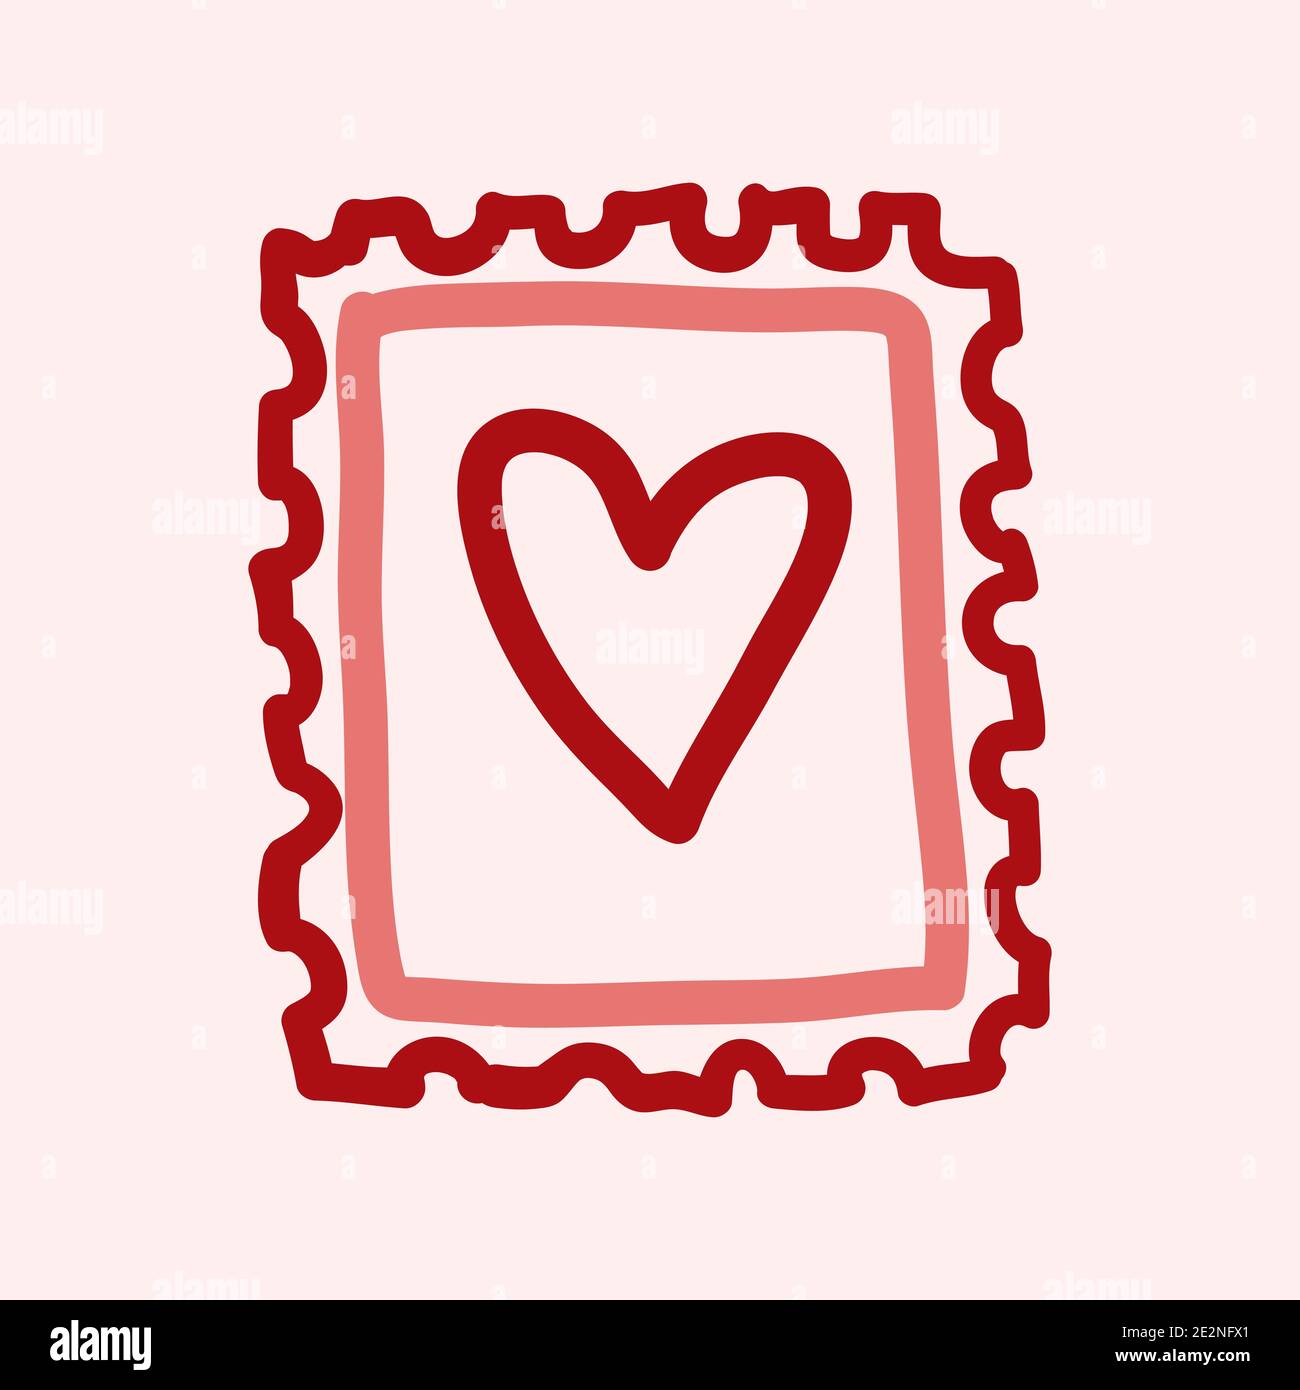 Postage stamp or letter stamp line art icon Stock Vector